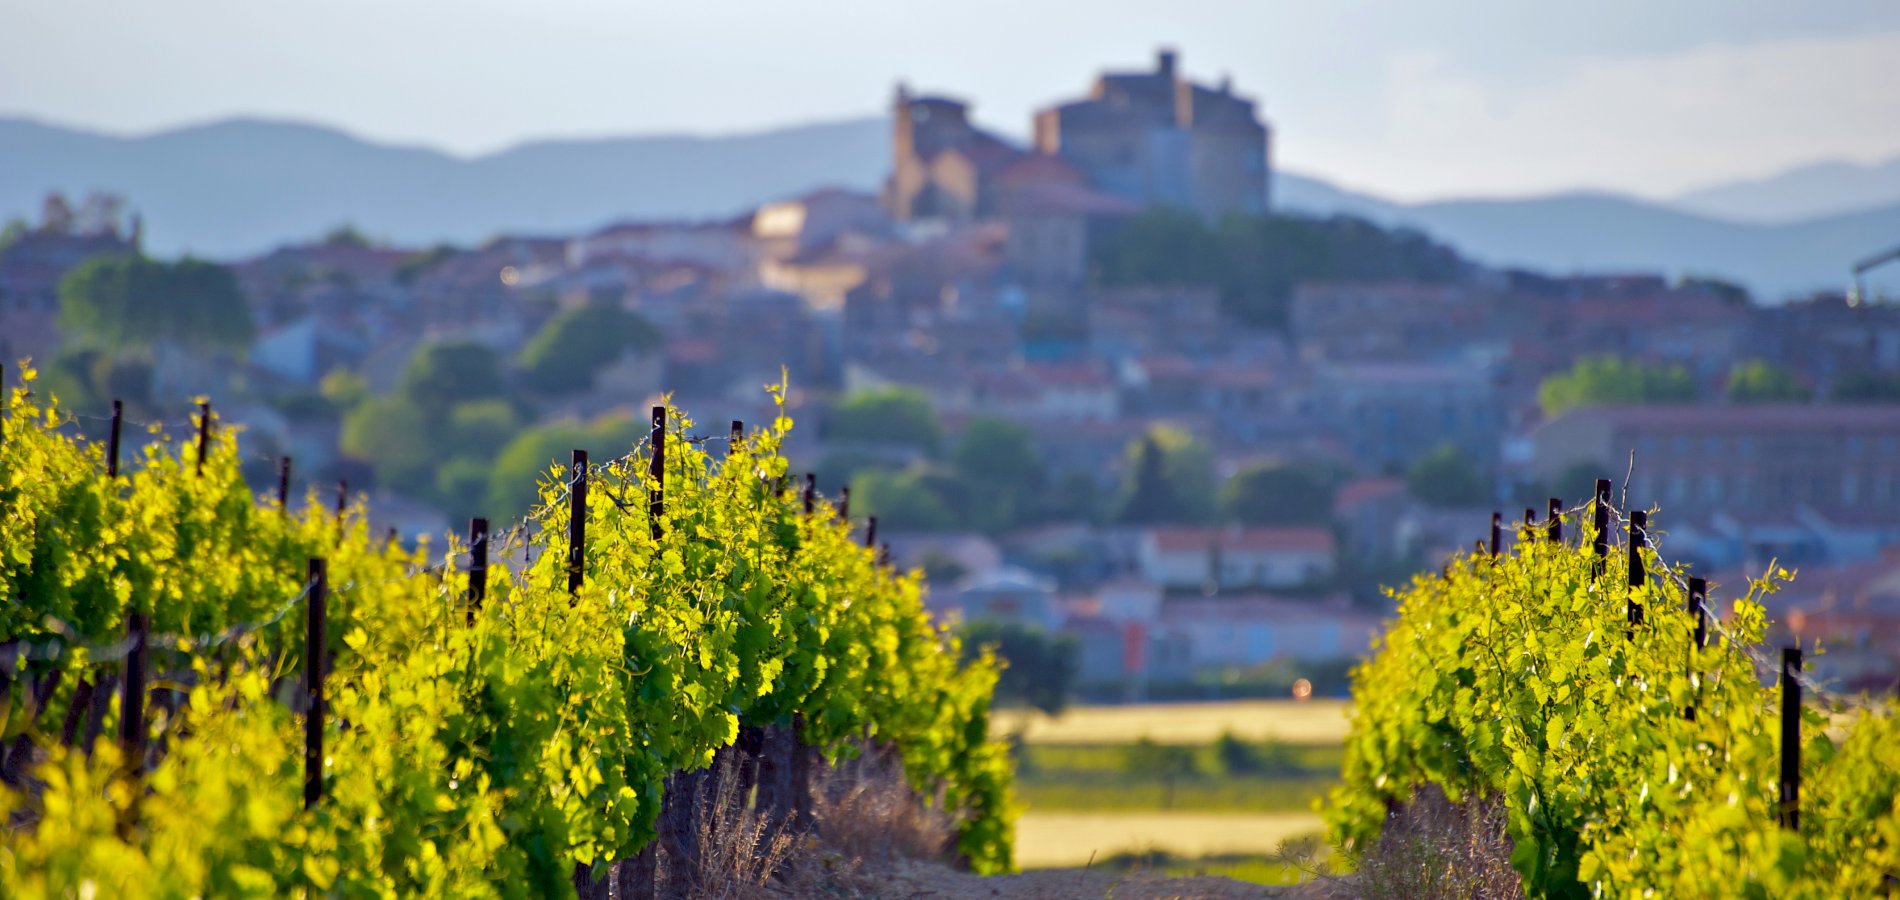 Ophorus Tours - A Private Languedoc Wine Tour Shore Excursion From Port Vendres